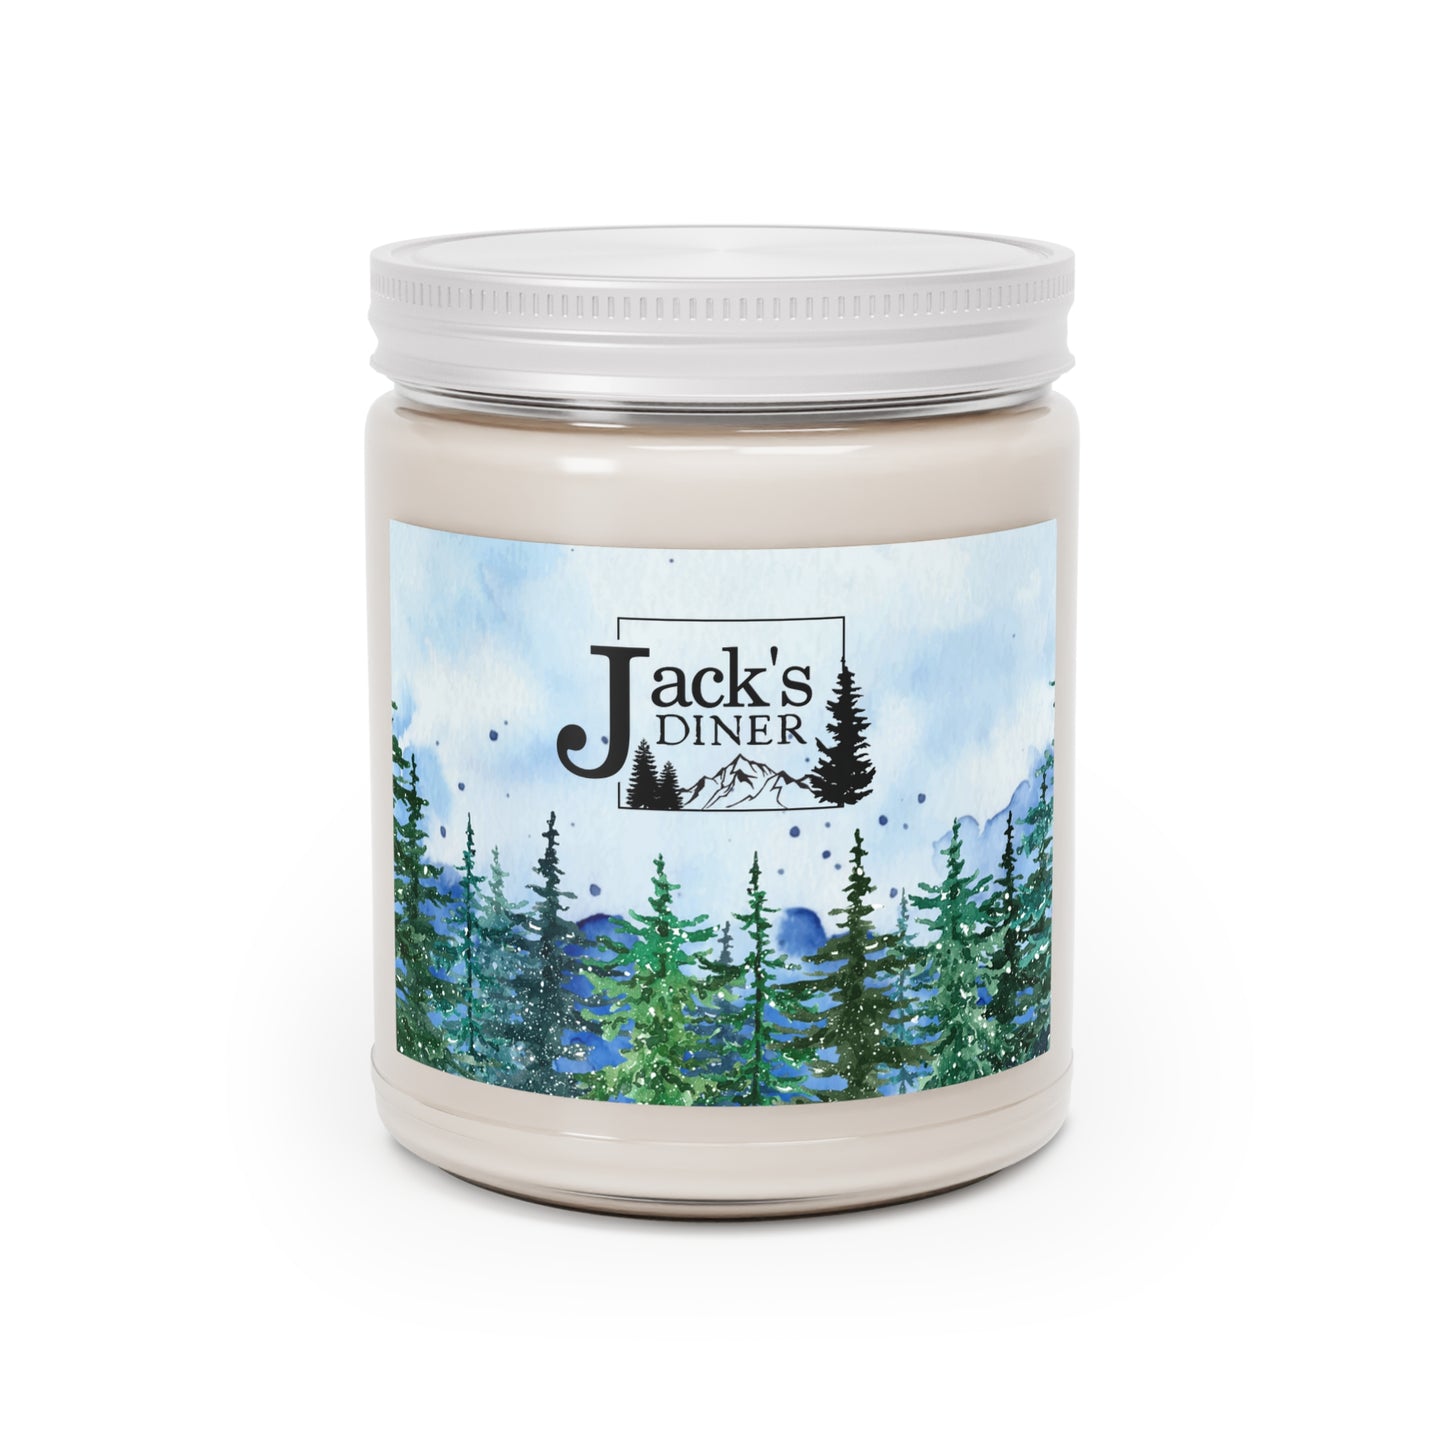 Jack's Diner Scented Soy Candle, 9oz (Classic Design) - FREE U.S. SHIPPING